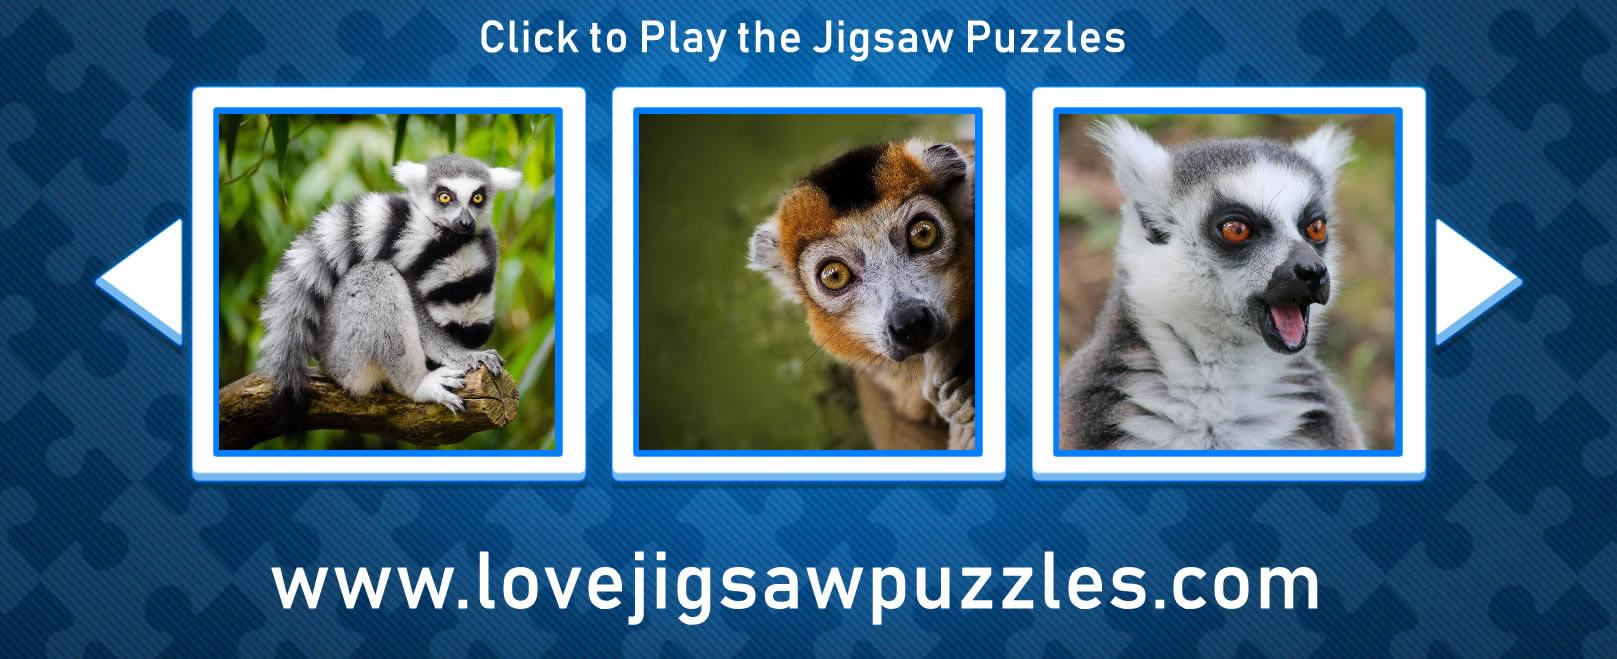 Free Jigsaw Puzzles of Lemures